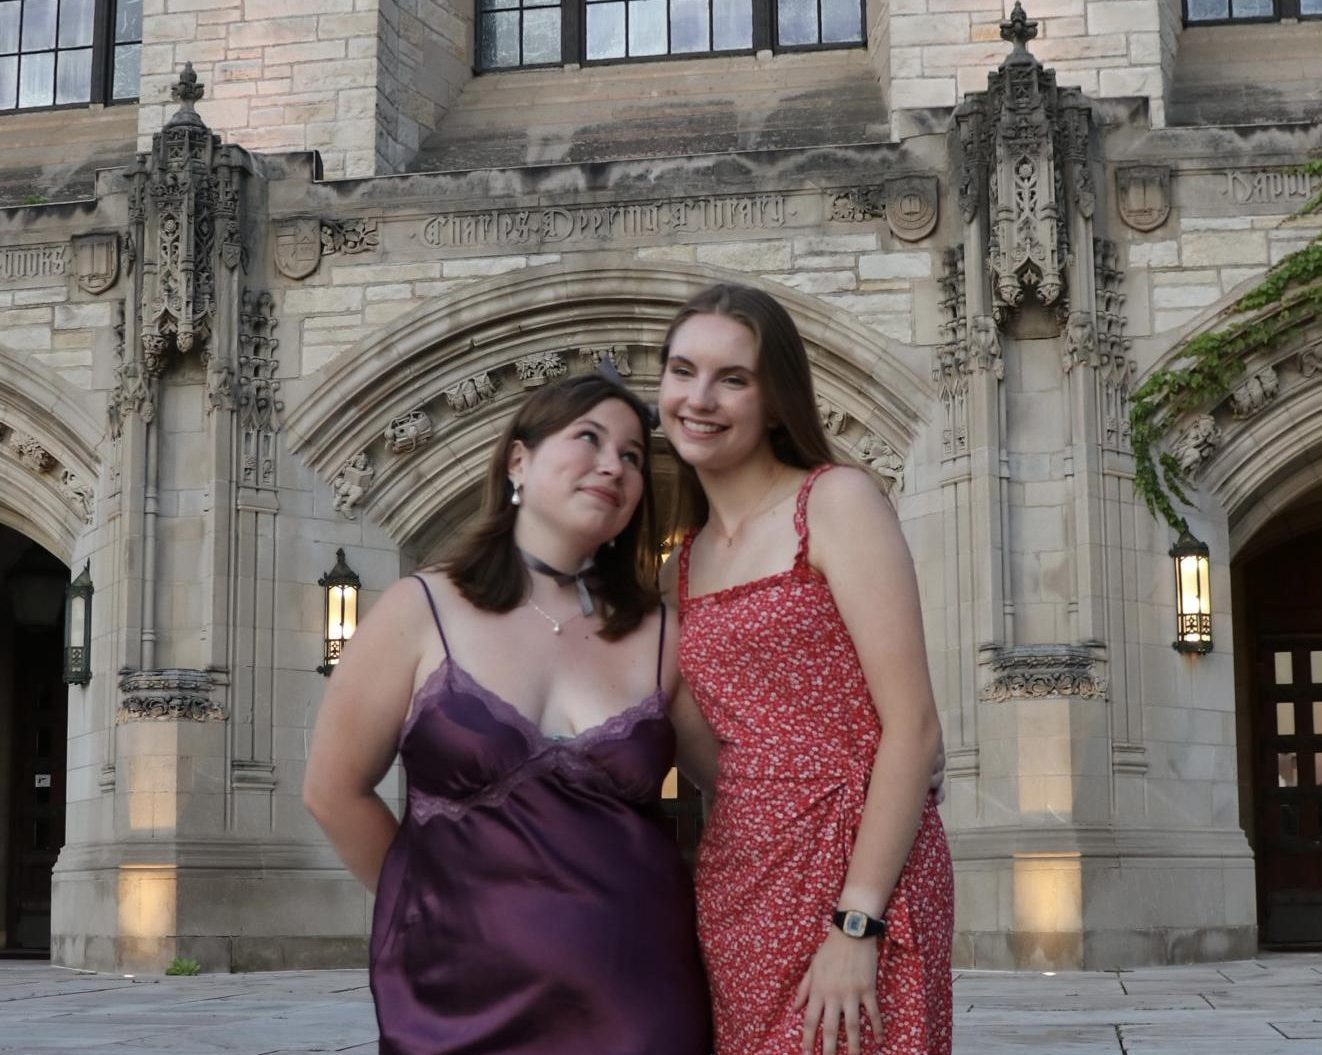 Dressed for Cherub Prom on July 20, Scott and Smith pose in front of the Charles Deering Library at Northwestern. Photo courtesy of Scott.